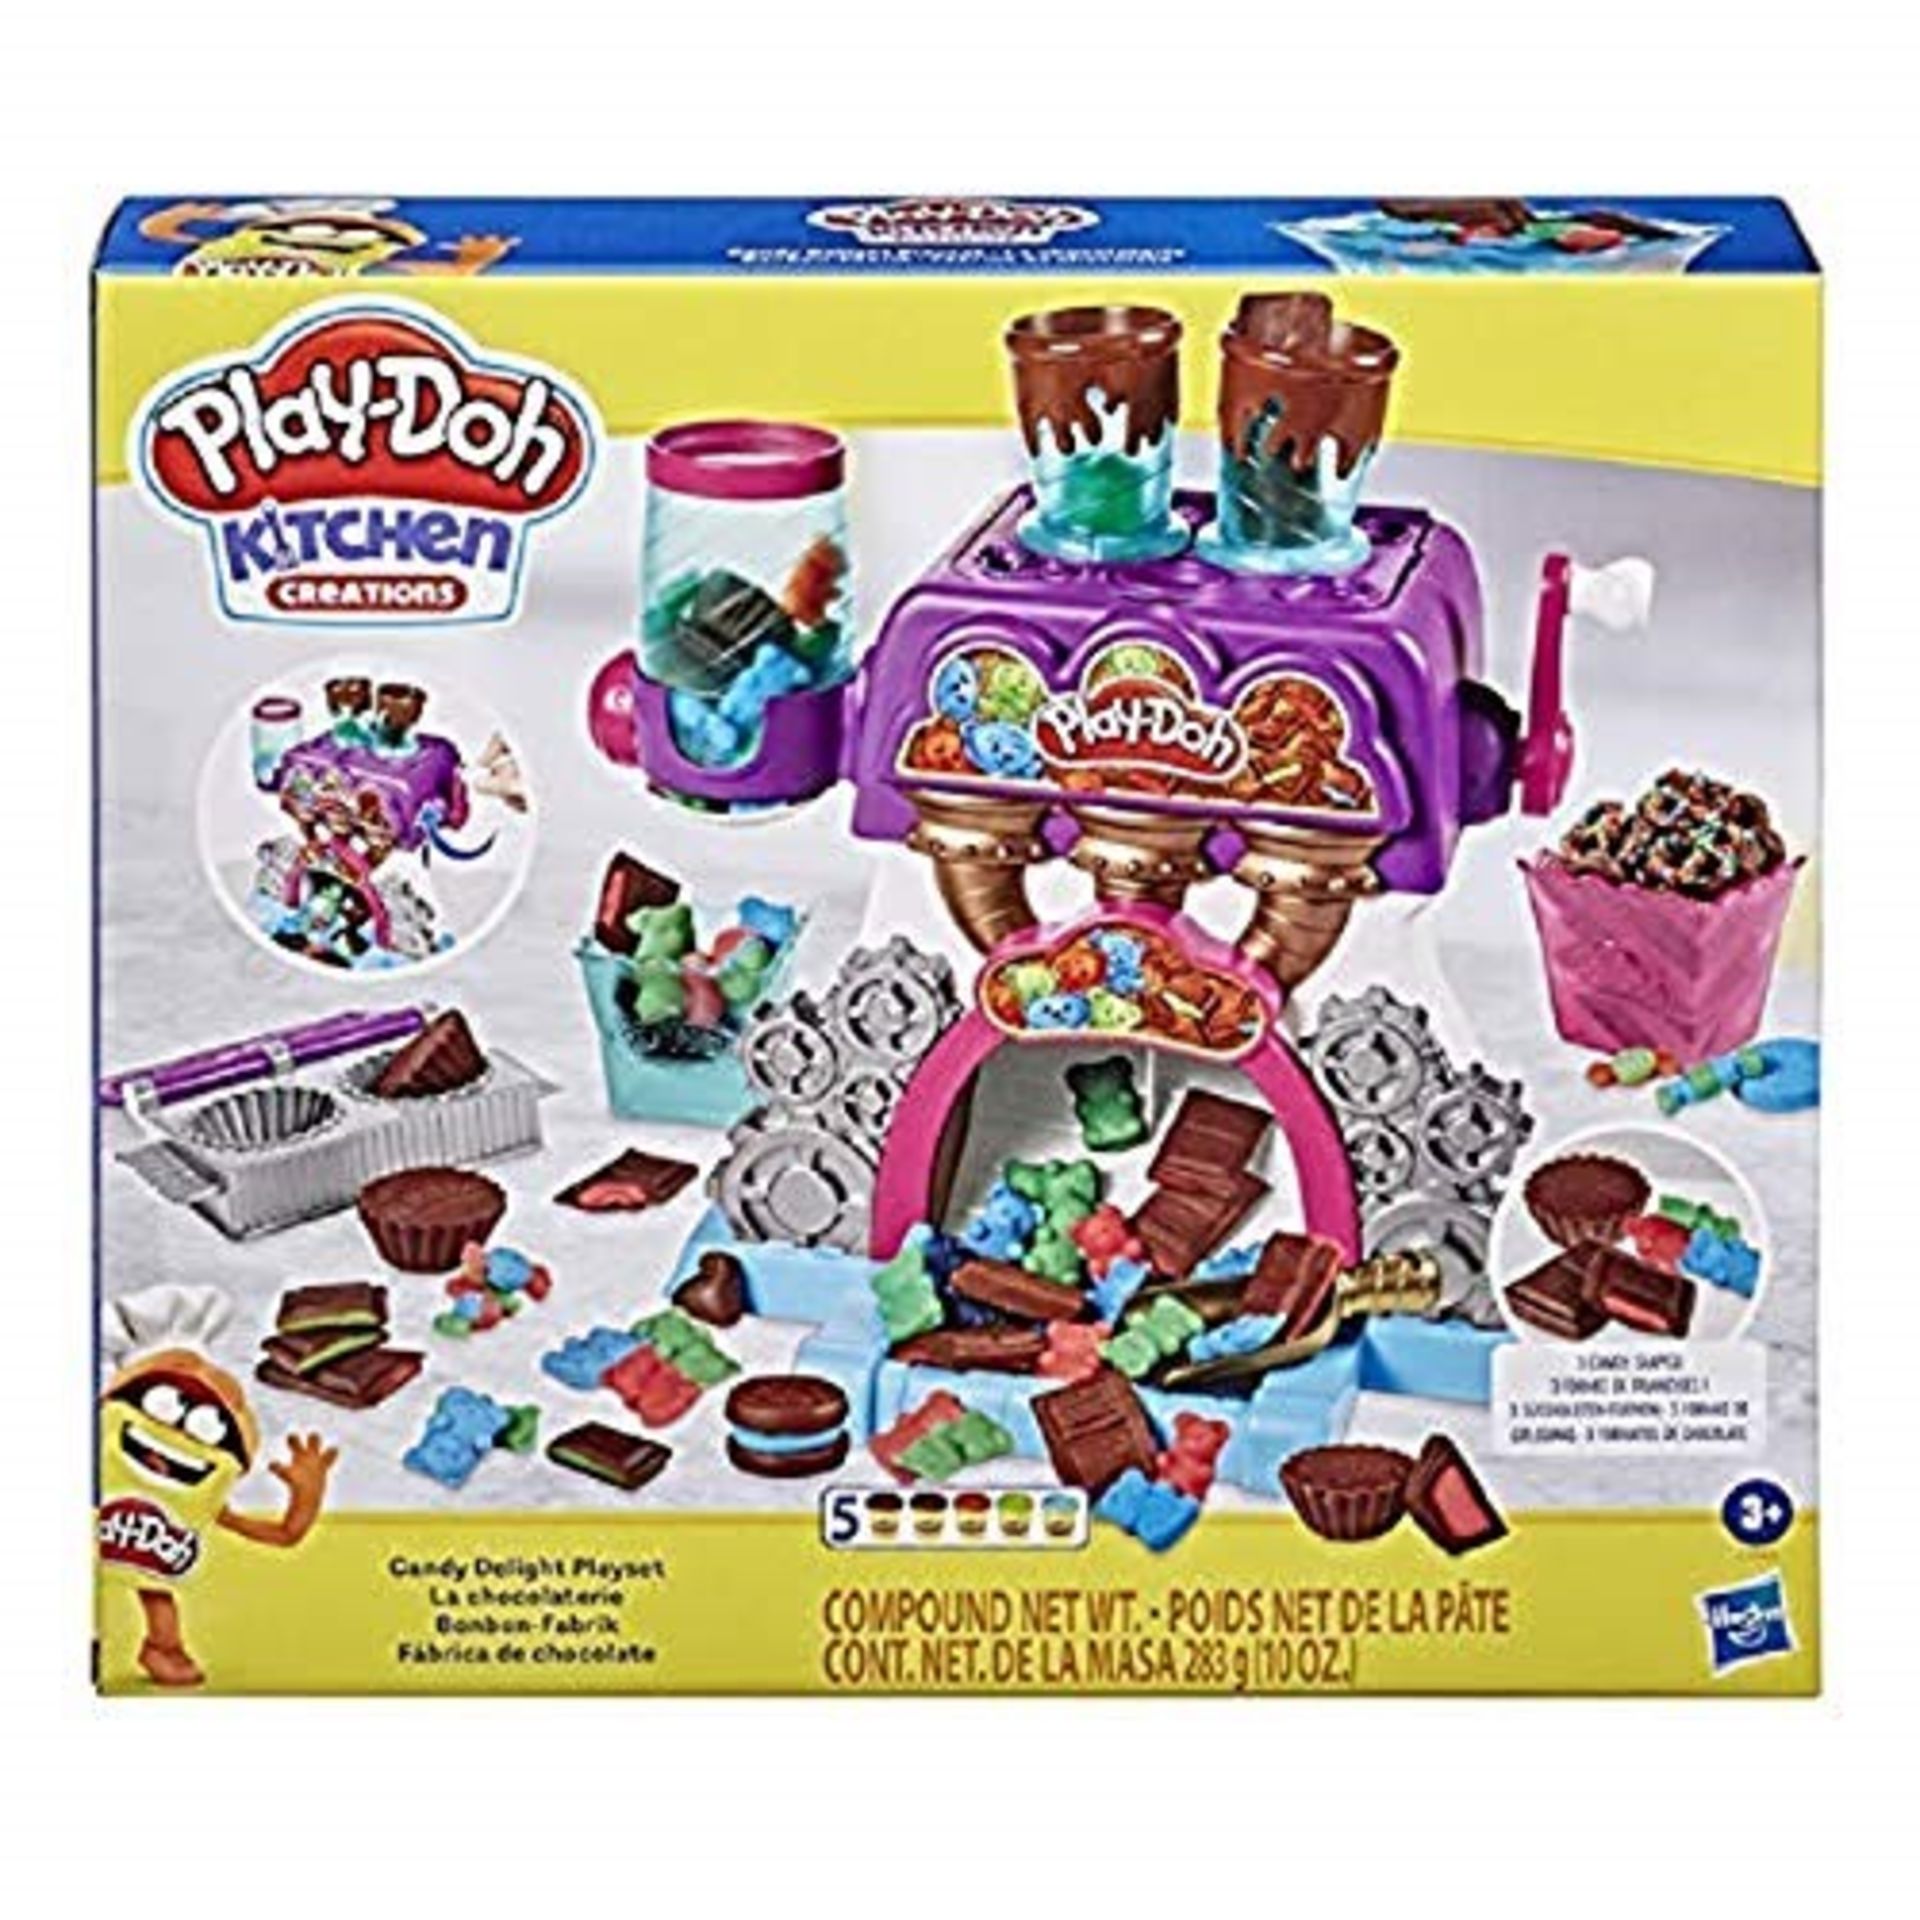 Play-Doh Kitchen Creations Candy Delight Playset for Kids 3 Years and Up with 5 Play-D